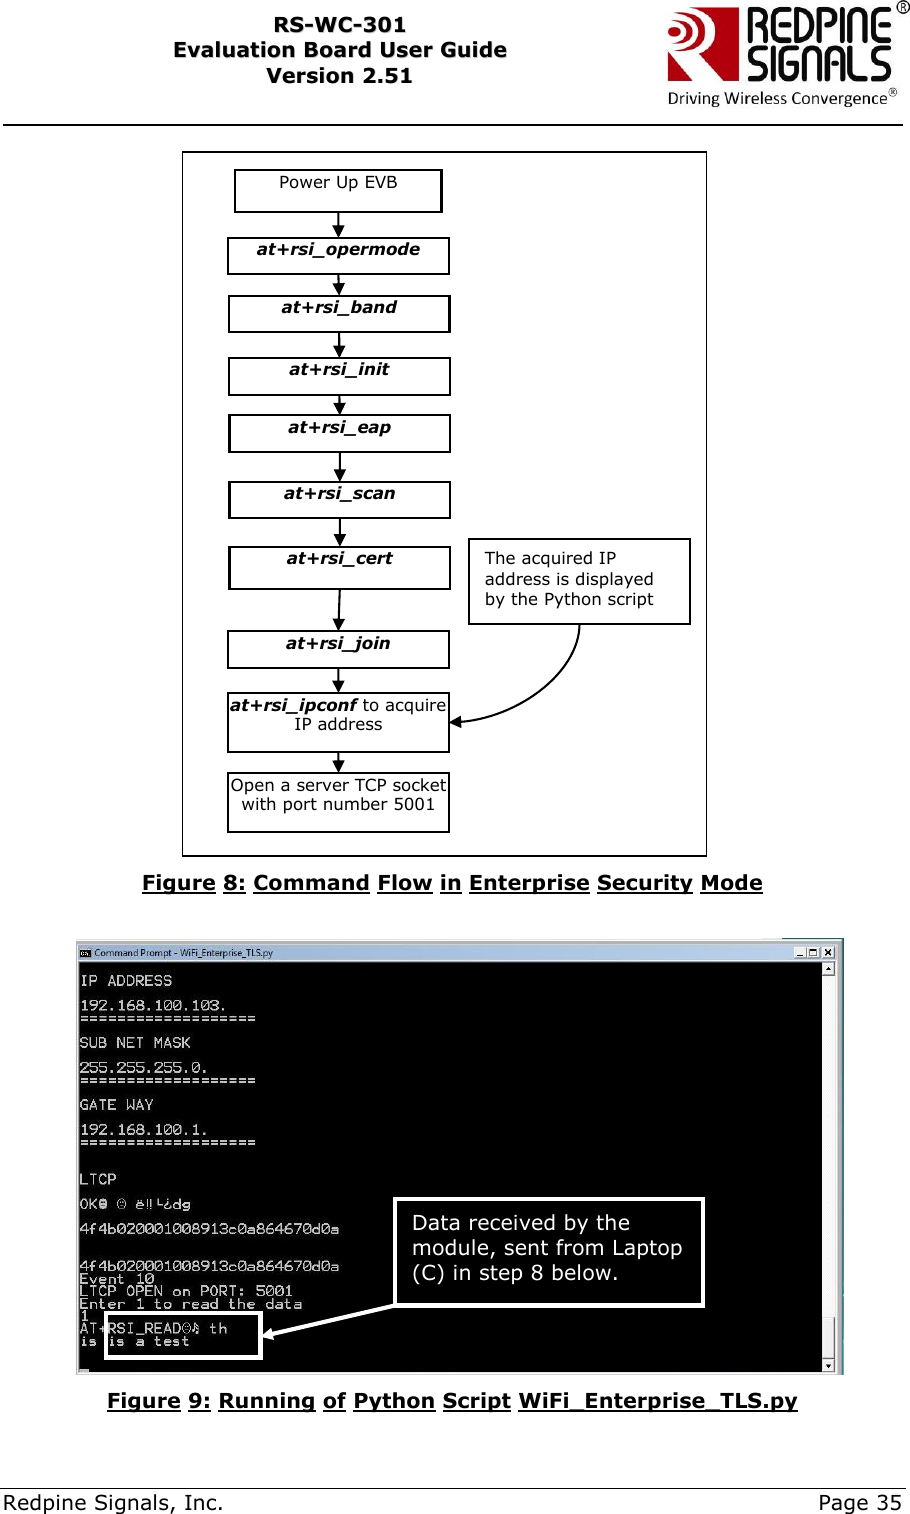     Redpine Signals, Inc.     Page 35 RRSS--WWCC--330011    EEvvaalluuaattiioonn  BBooaarrdd  UUsseerr  GGuuiiddee  VVeerrssiioonn  22..5511     Figure 8: Command Flow in Enterprise Security Mode   Figure 9: Running of Python Script WiFi_Enterprise_TLS.py  Power Up EVB at+rsi_opermode at+rsi_band at+rsi_scan at+rsi_cert at+rsi_join at+rsi_init at+rsi_ipconf to acquire IP address Open a server TCP socket with port number 5001 The acquired IP address is displayed by the Python script at+rsi_eap Data received by the module, sent from Laptop (C) in step 8 below. 